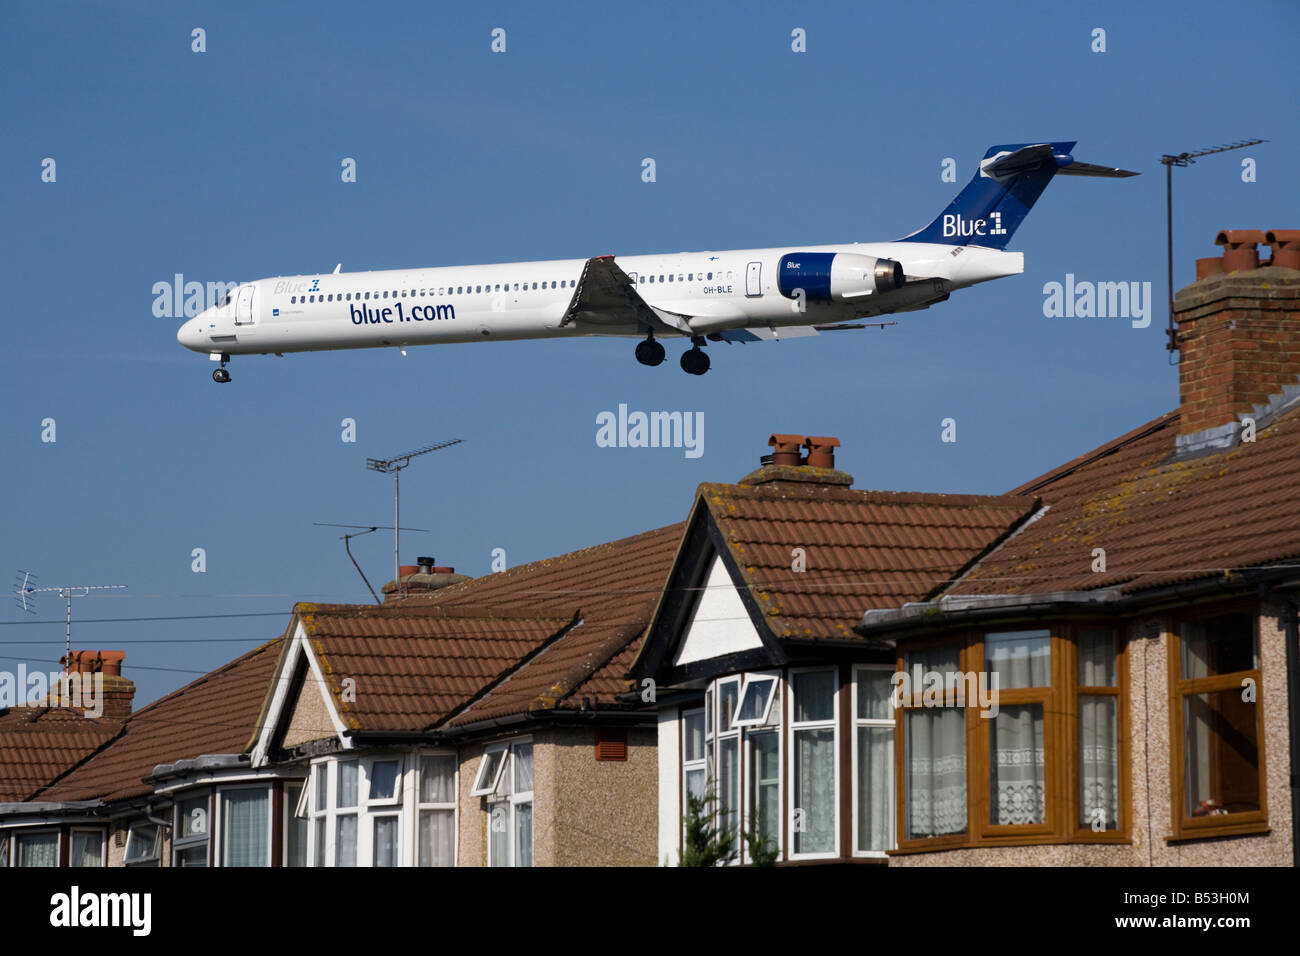 Blue 1 McDonnell Douglas MD MD-90-30 registration number OH-BLE approaching Heathrow airport, London. UK (41) Stock Photo